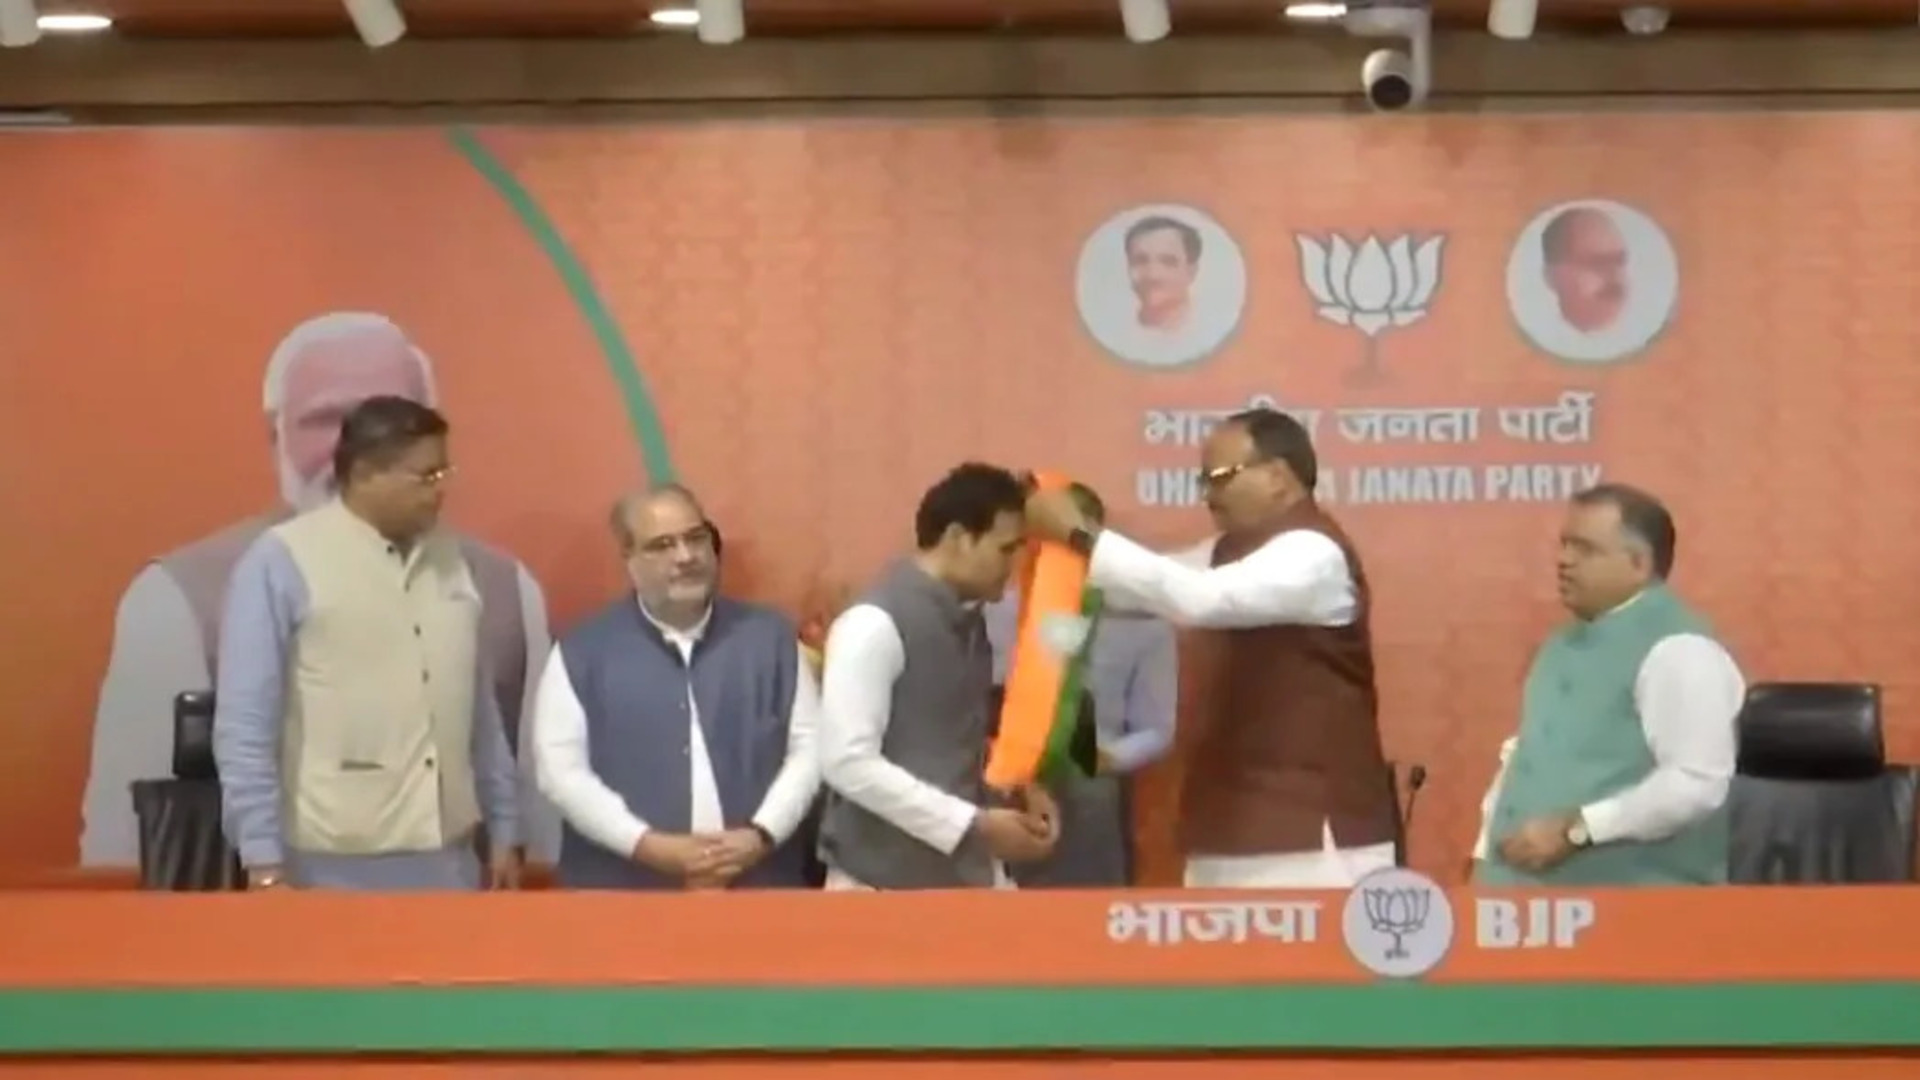 BSP MP Ritesh Pandey Switches Over To BJP